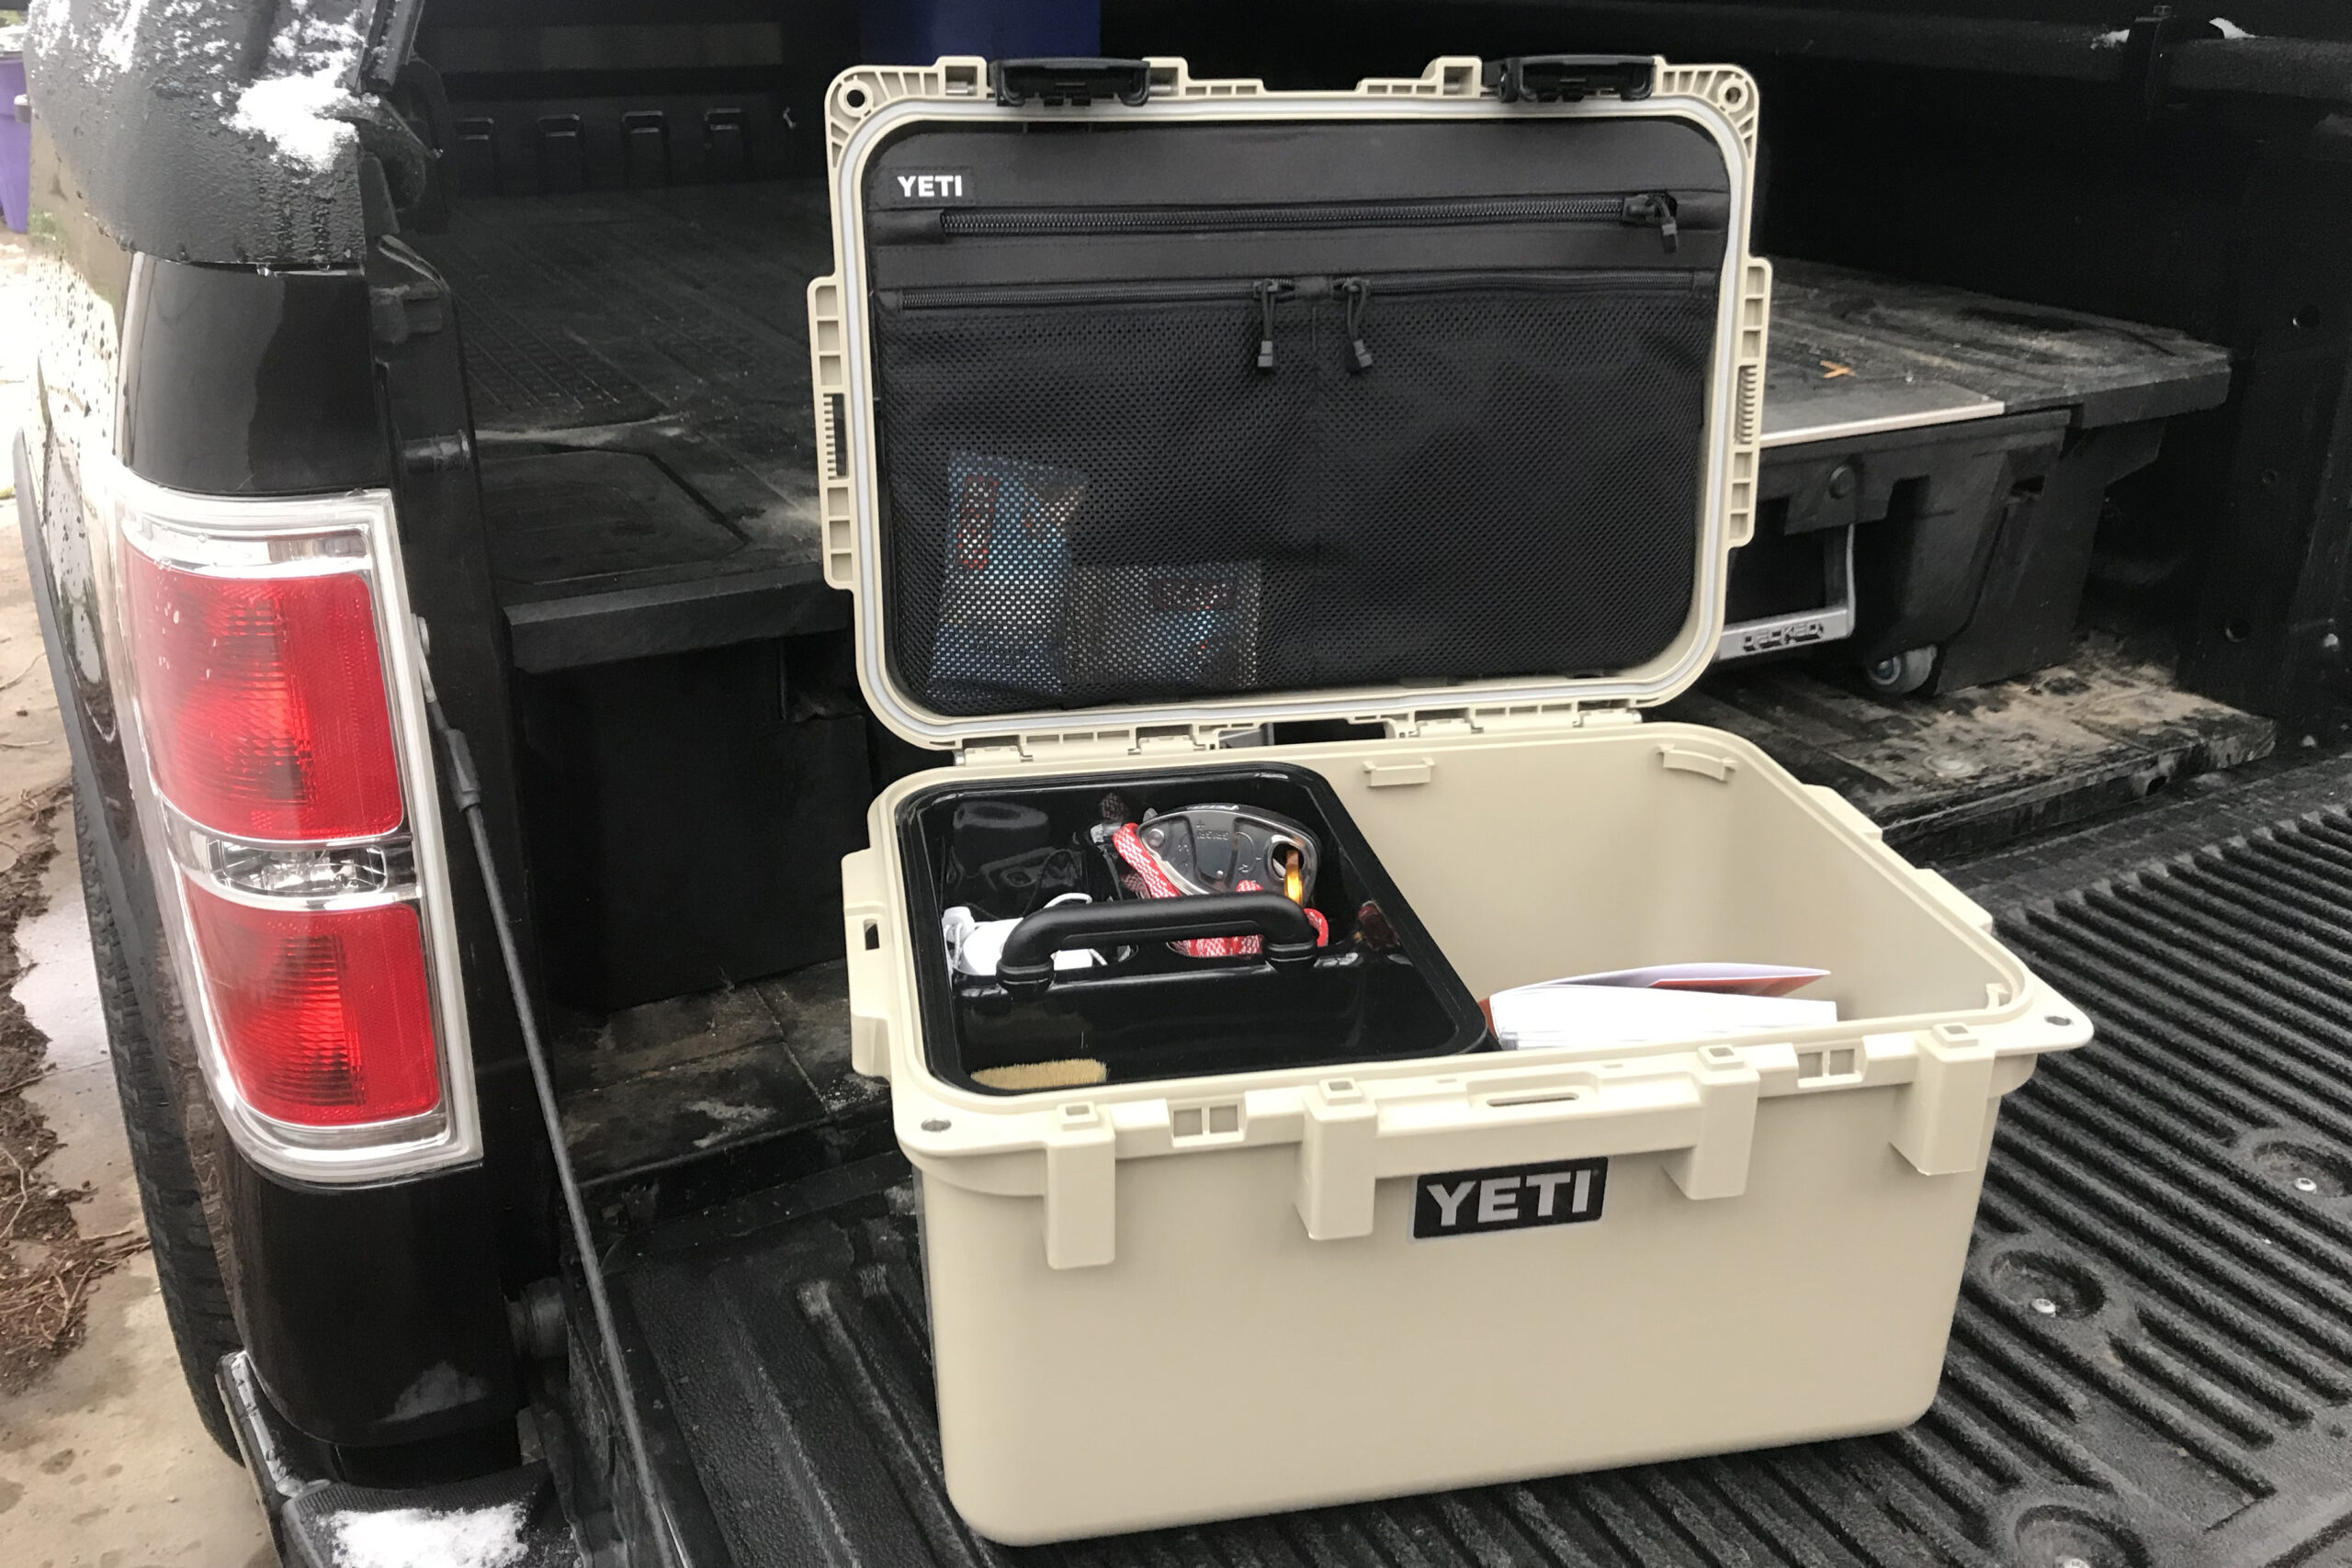 https://watersportswest.com/wp-content/uploads/2021/02/YETI-LoadOut-GoBox-in-truck-scaled.jpg